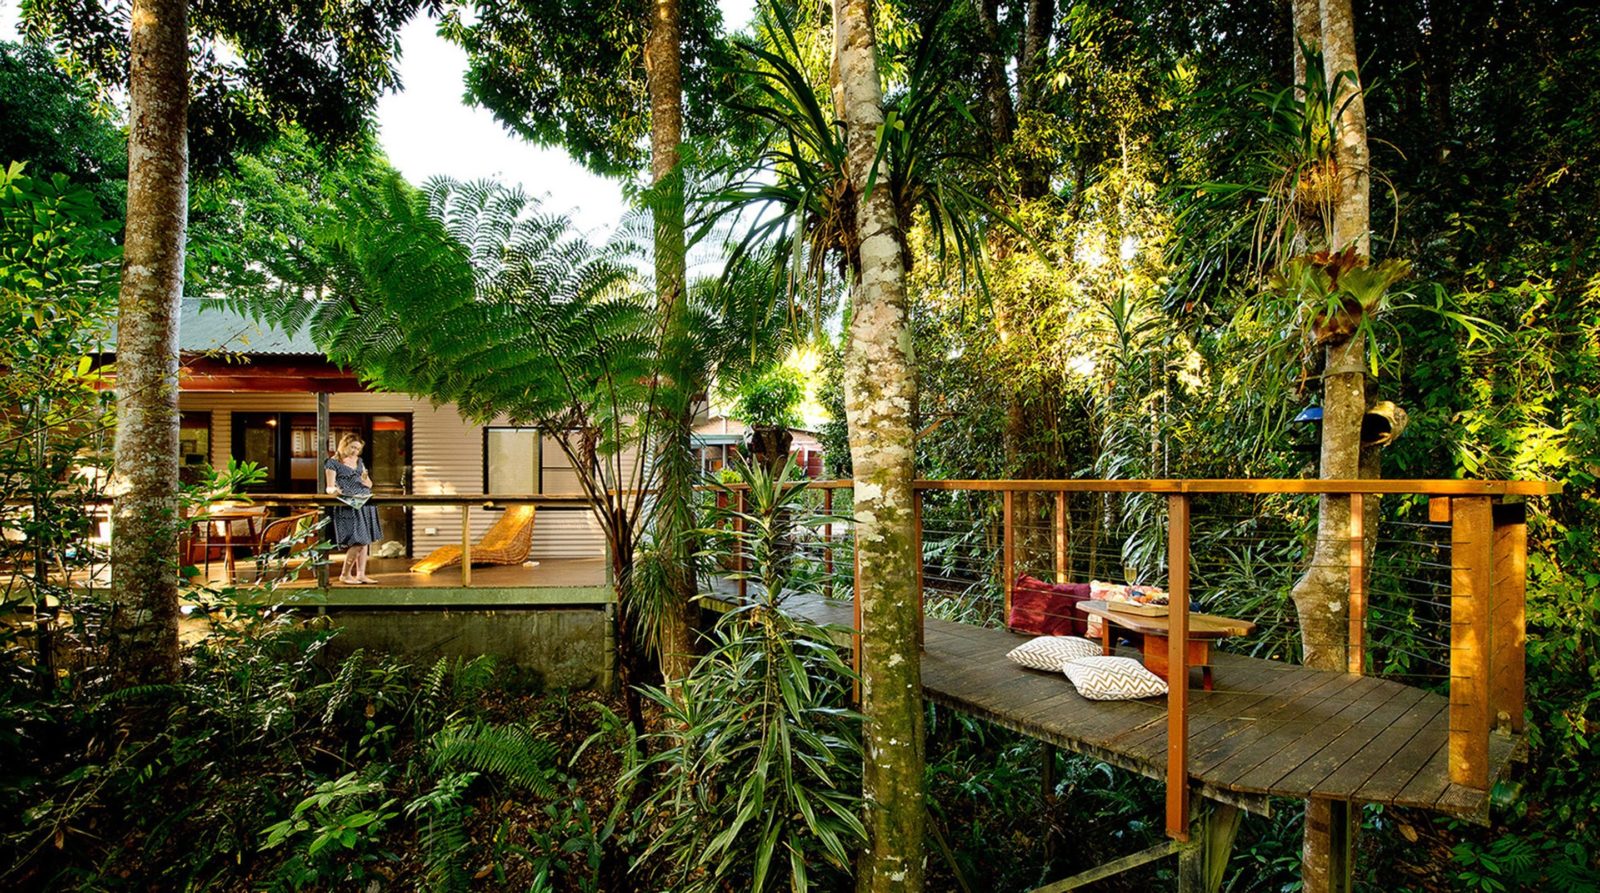 alt="Veranda and walkway leads into the rain forest overlooking the river at Sharlynn"